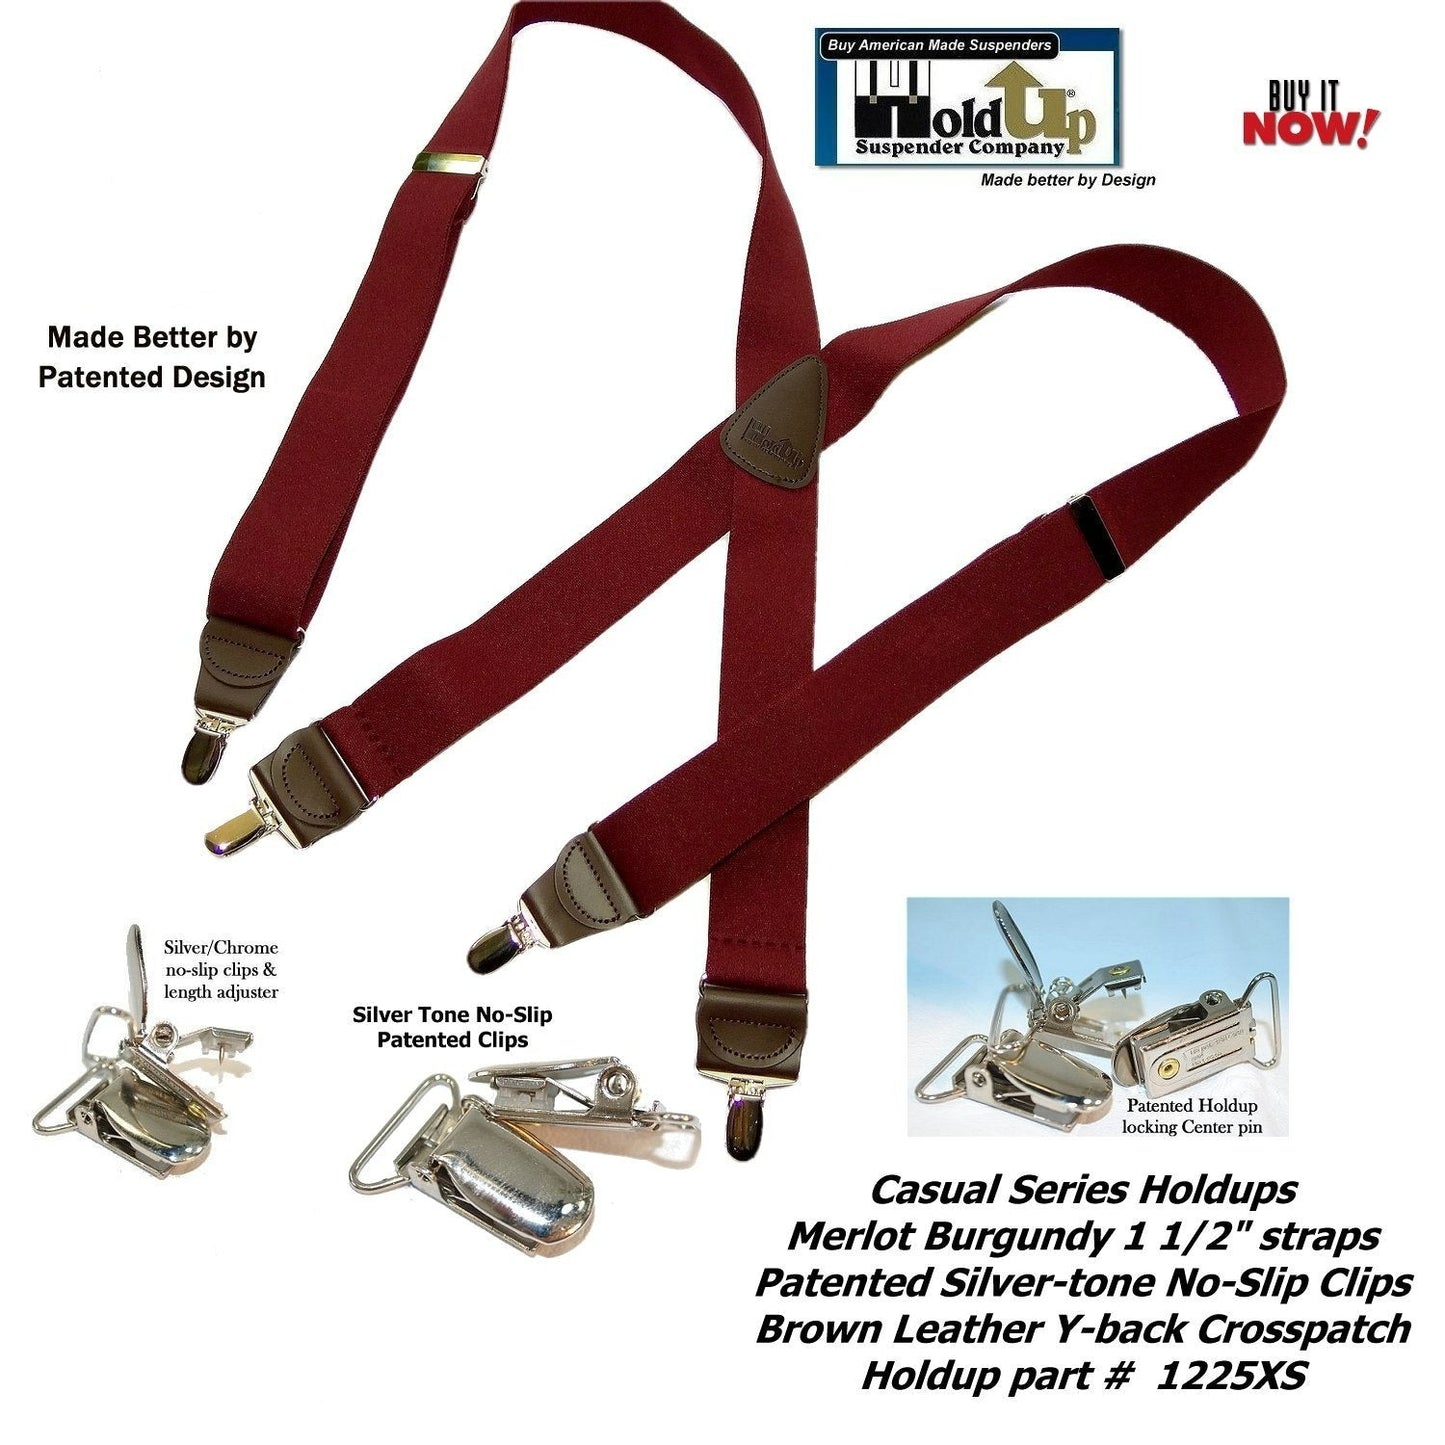 HoldUp Brand Merlot Burgundy 1 1/2" wide suspenders in X-back style with USA Patented No-slip Silver-tone clips